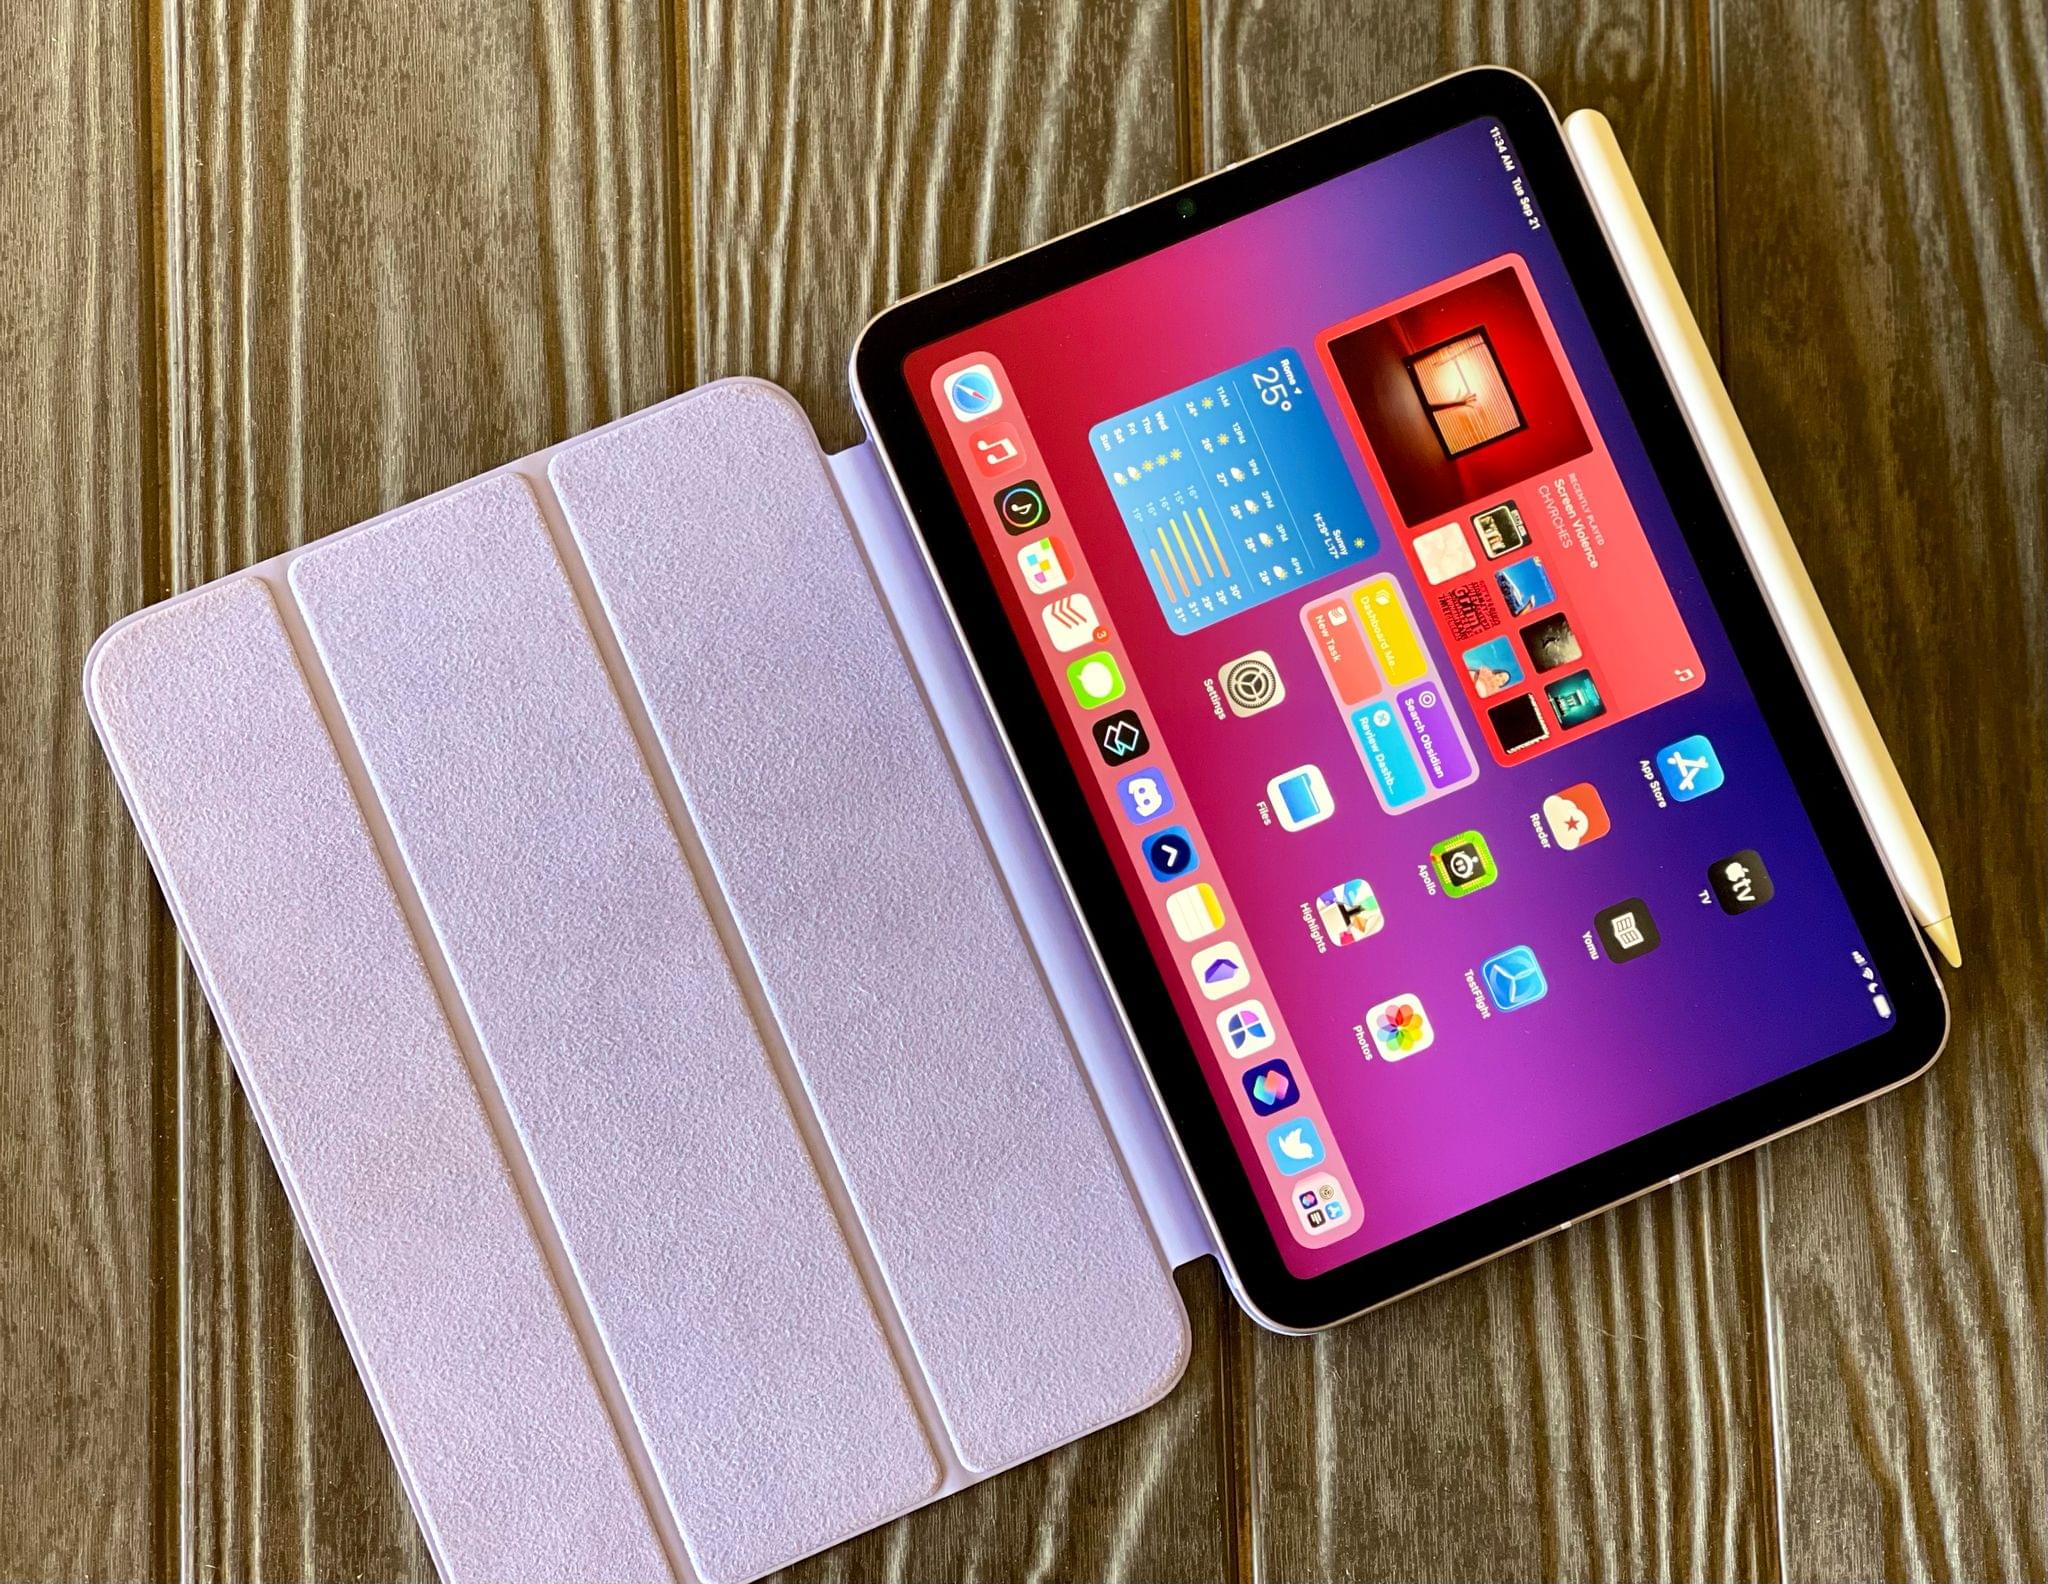 The purple Smart Folio is slightly better, but still pretty washed out. Why are these colors always so boring?